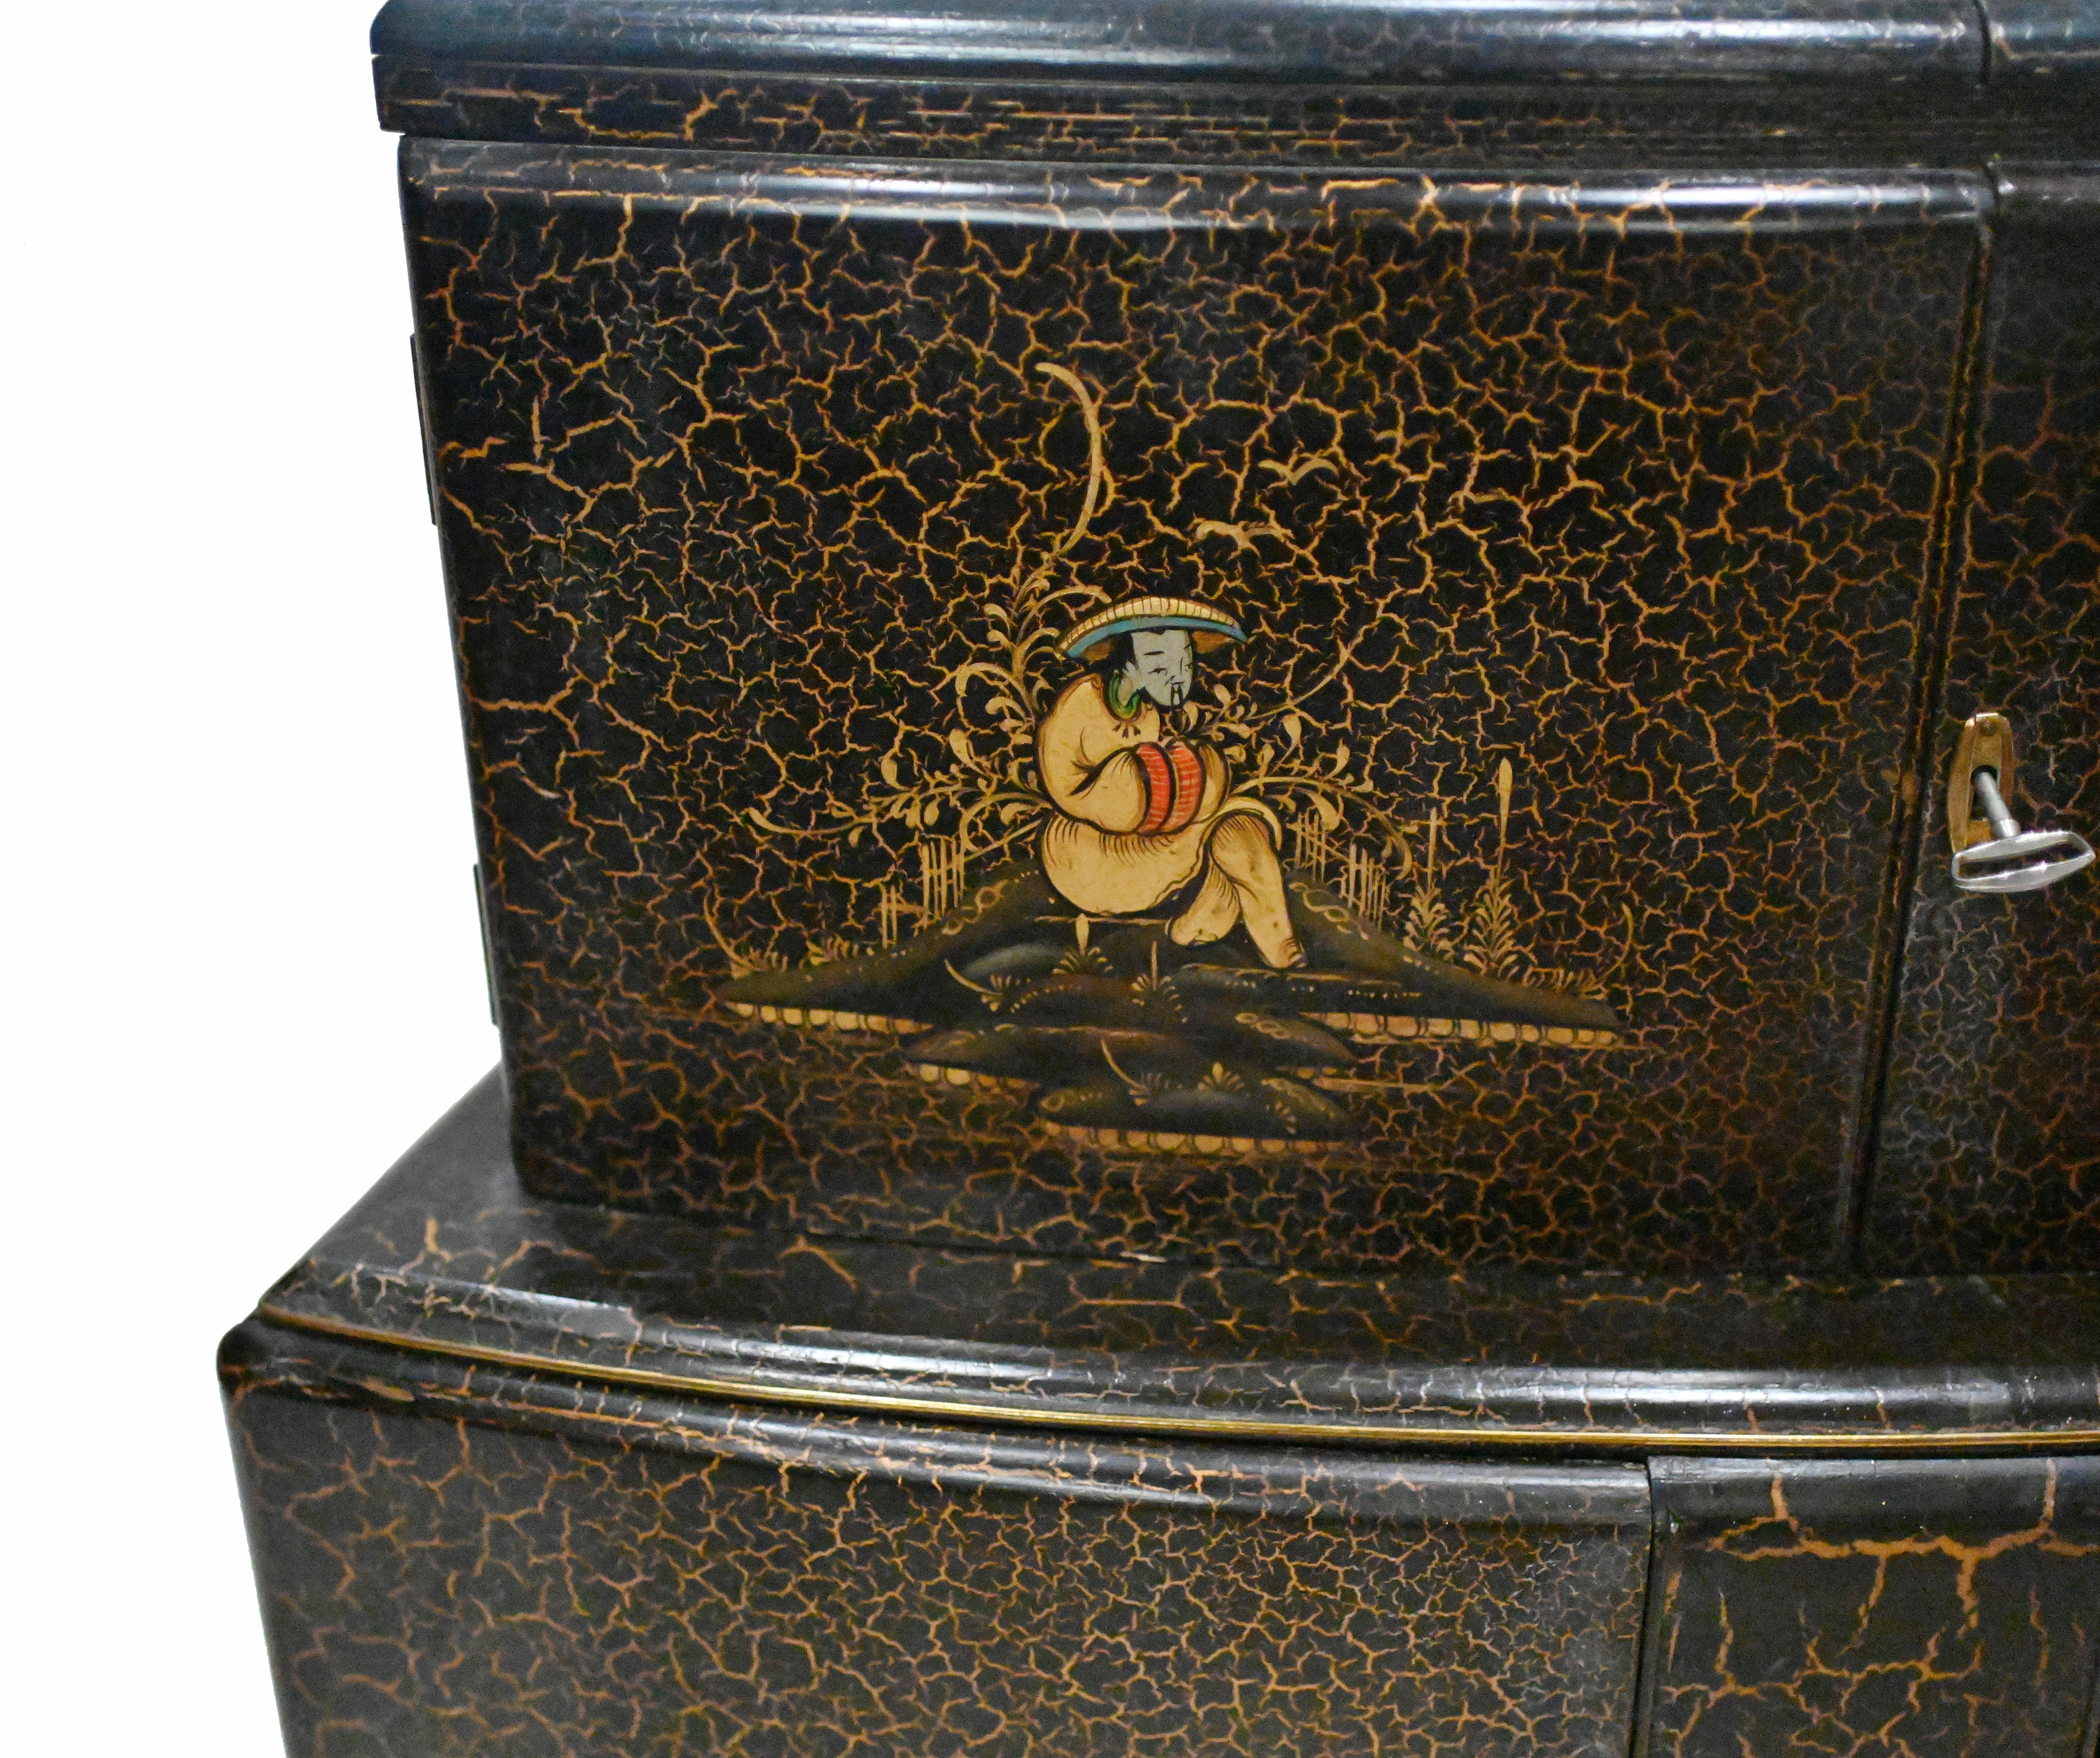 Gorgeous vintage 1930s art deco cocktail cabinet with intricate Chinoiserie
An unusual cocktail cabinet decorated with Chinese figures and Chinoiserie with a black craquelure finish.
Painted designs to the front include Chinese flowers, a wise man